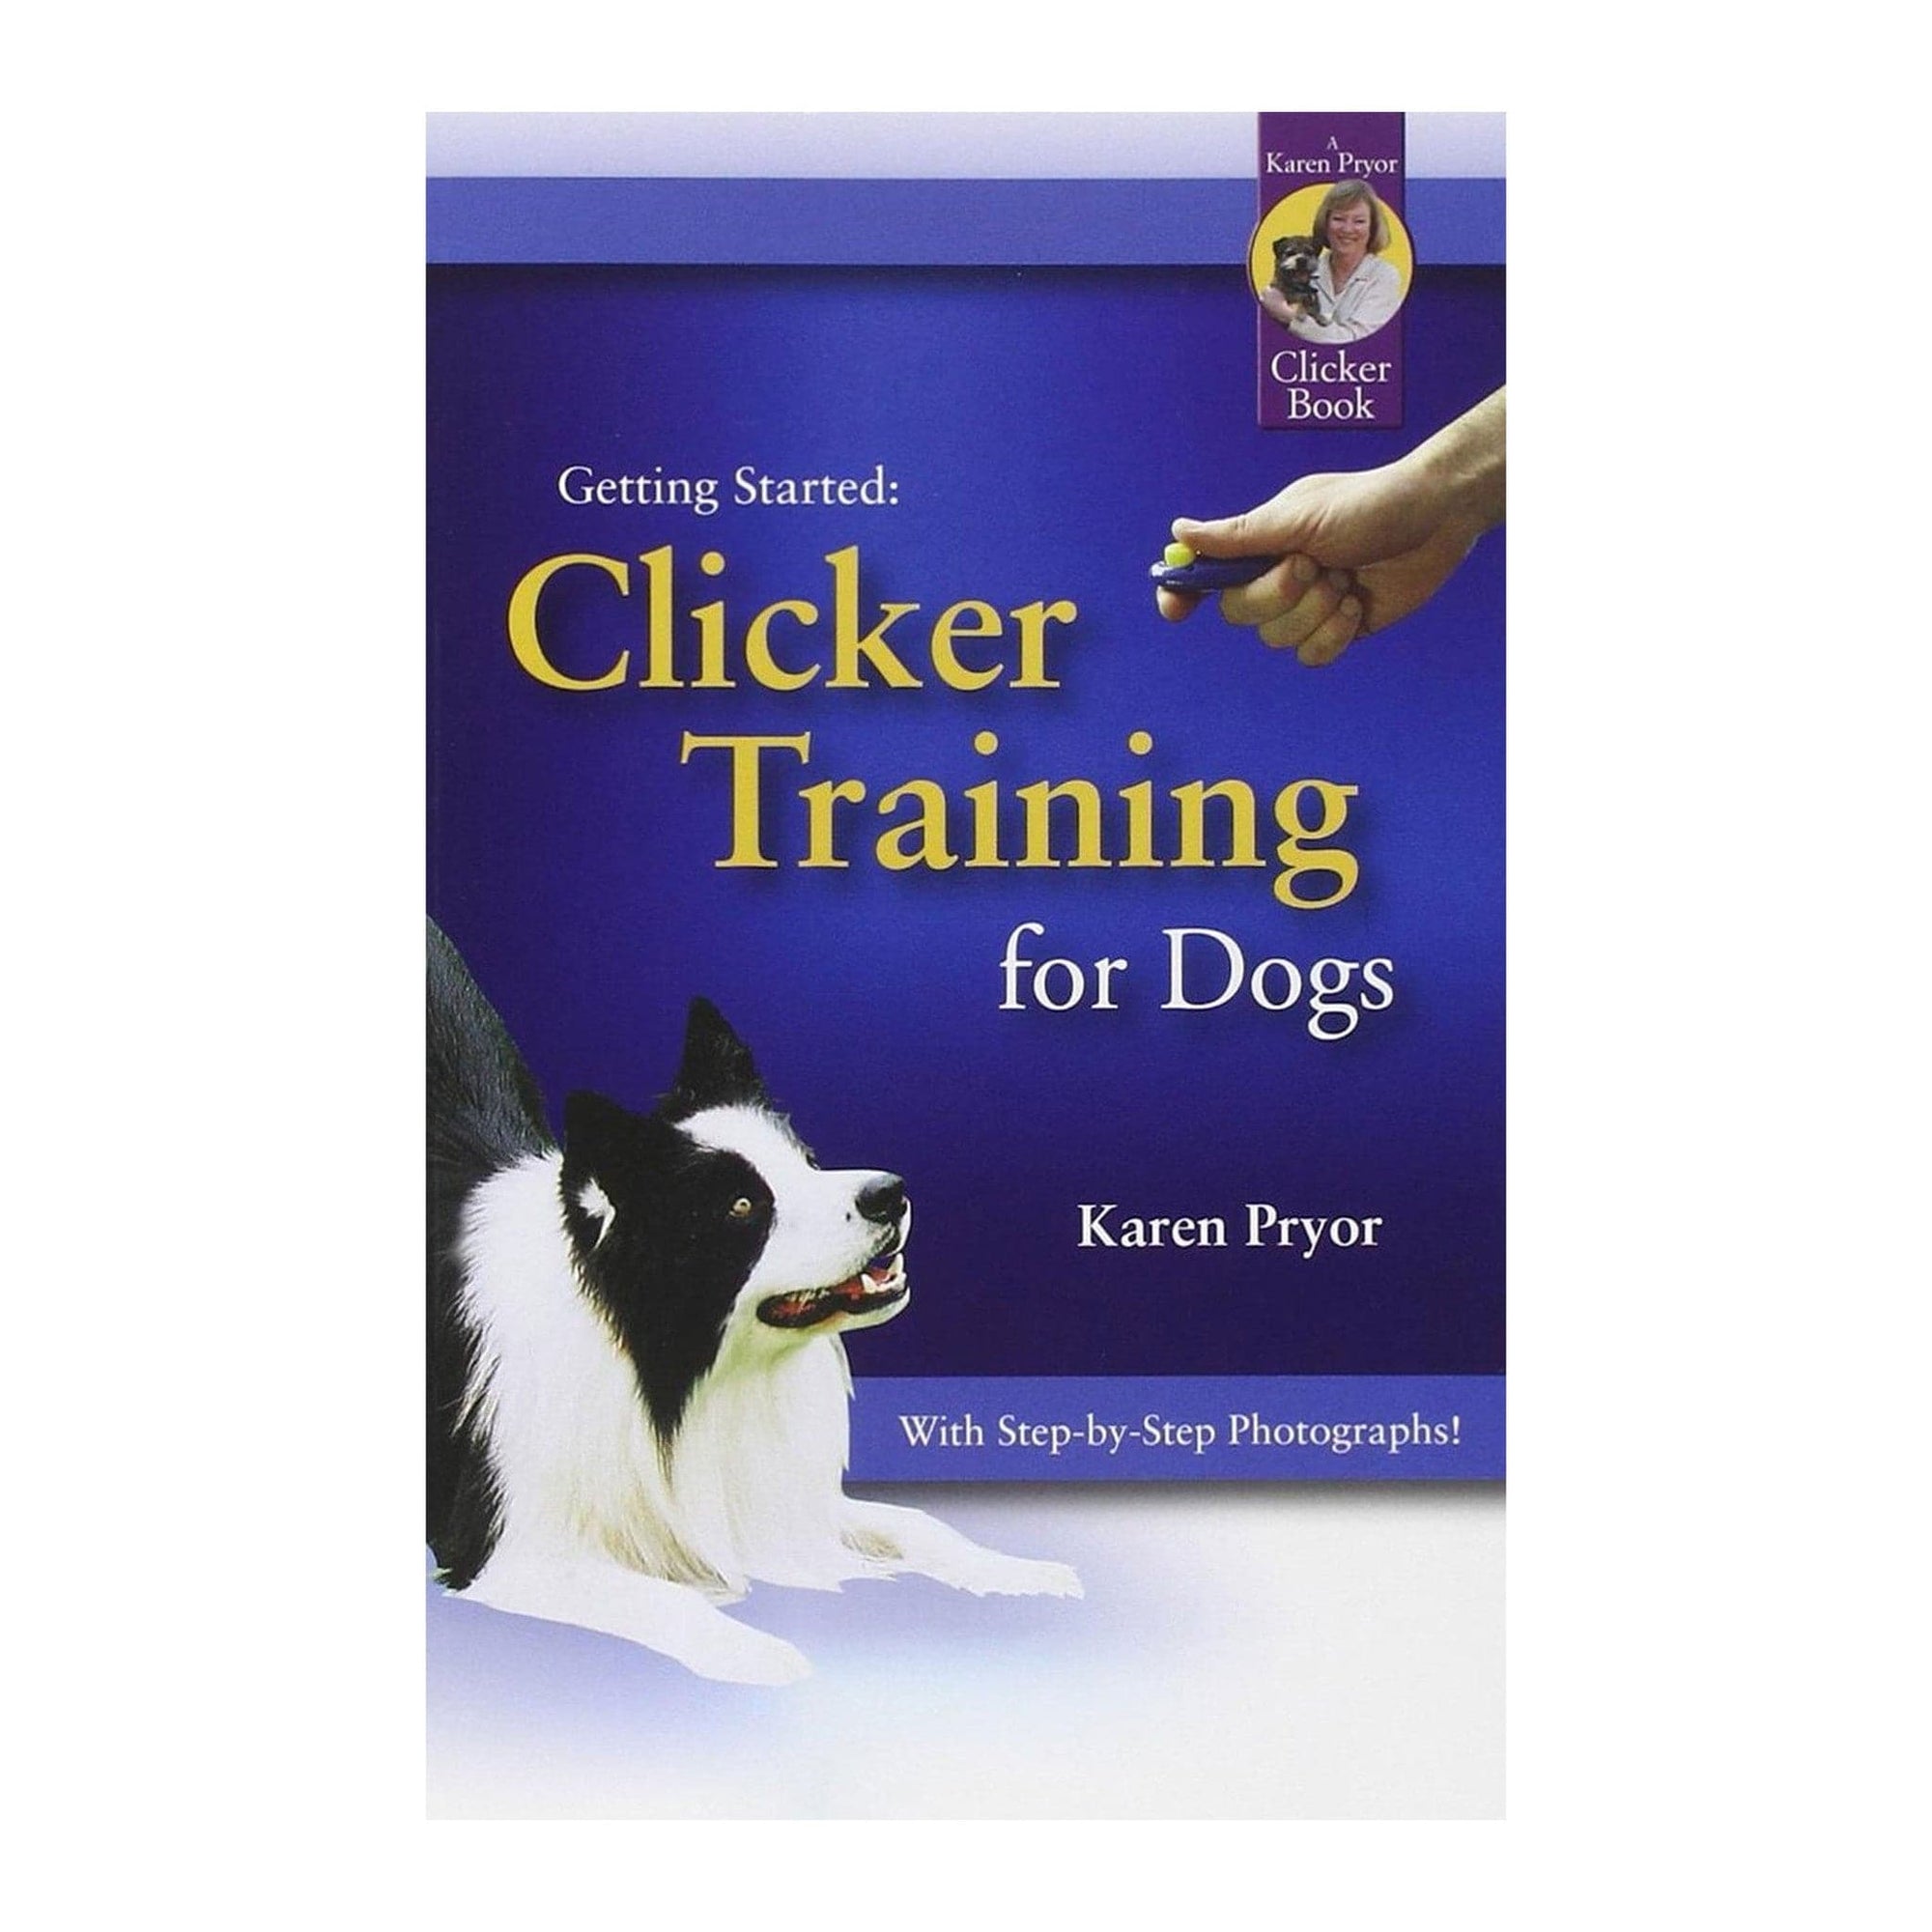 E-BOOK Getting Started: Clicker Training for Dogs by Karen Pryor